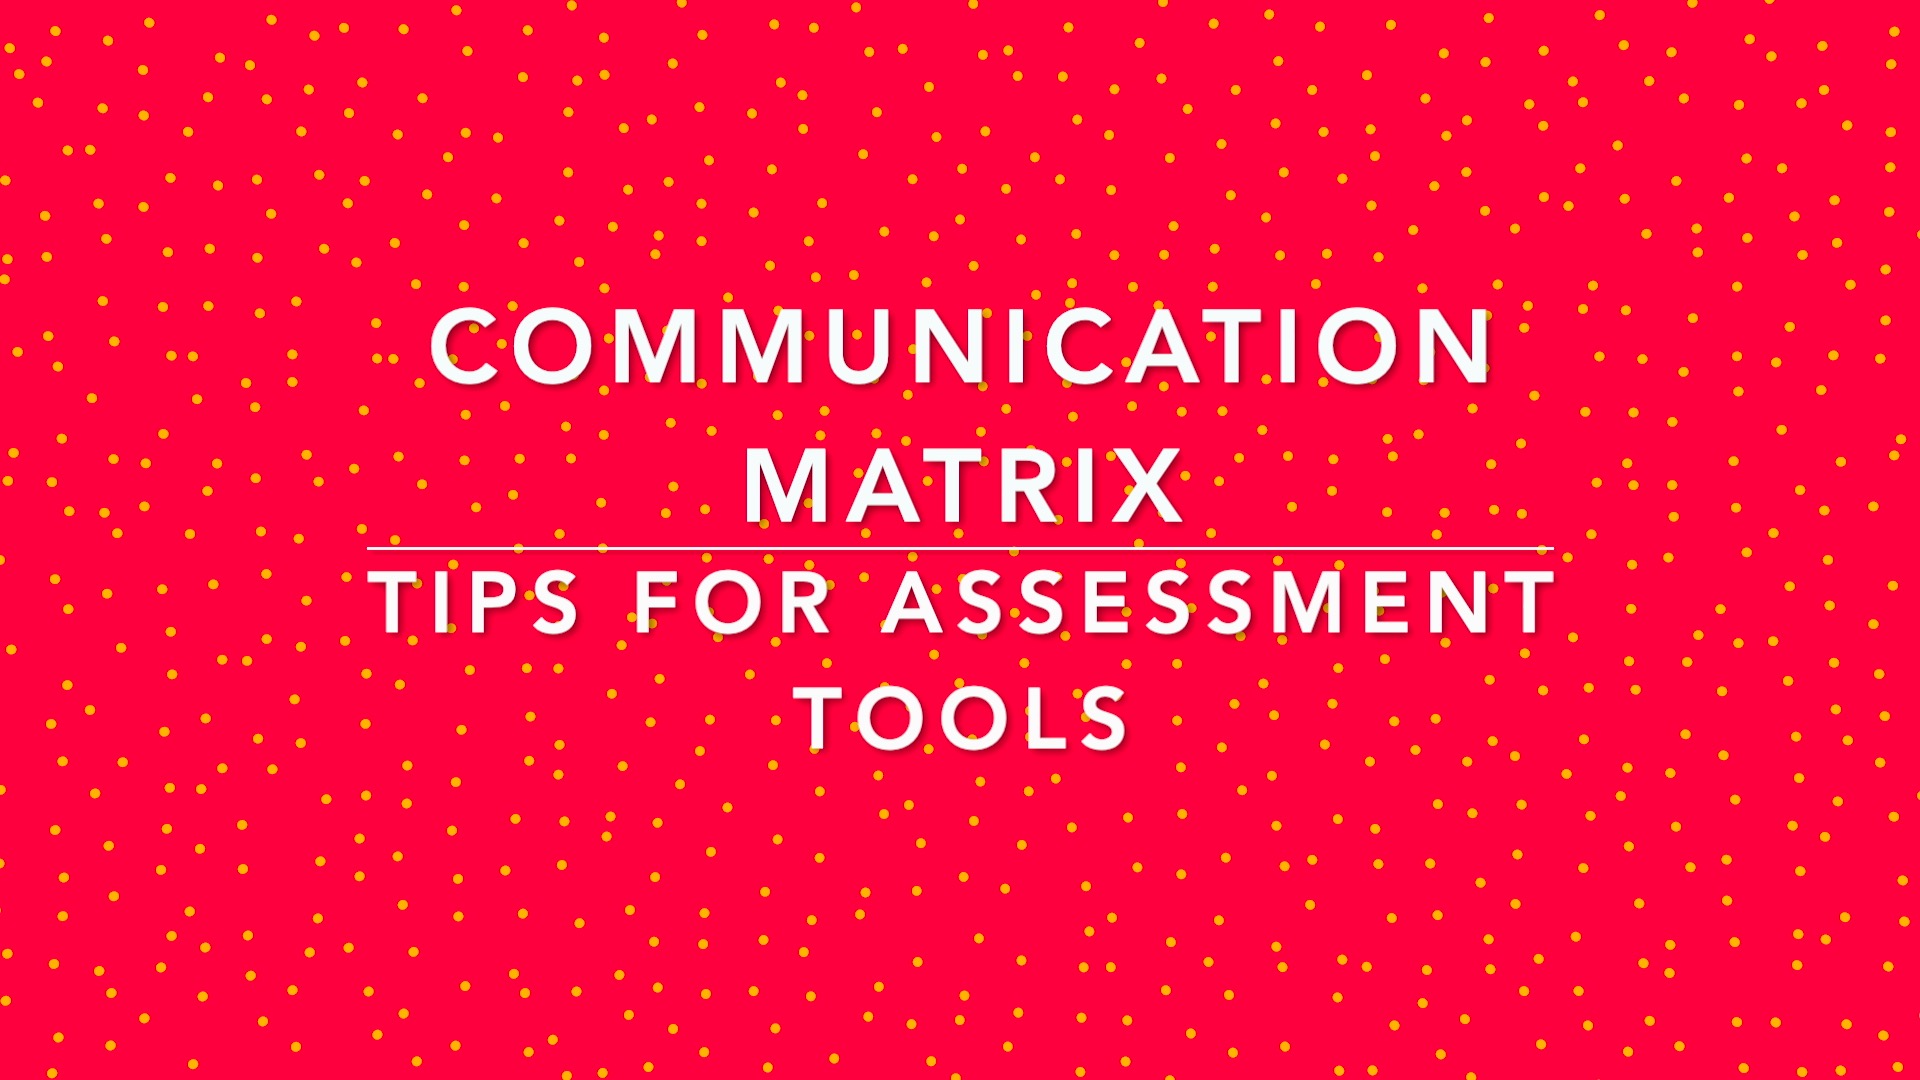 Overview of The Communication Matrix